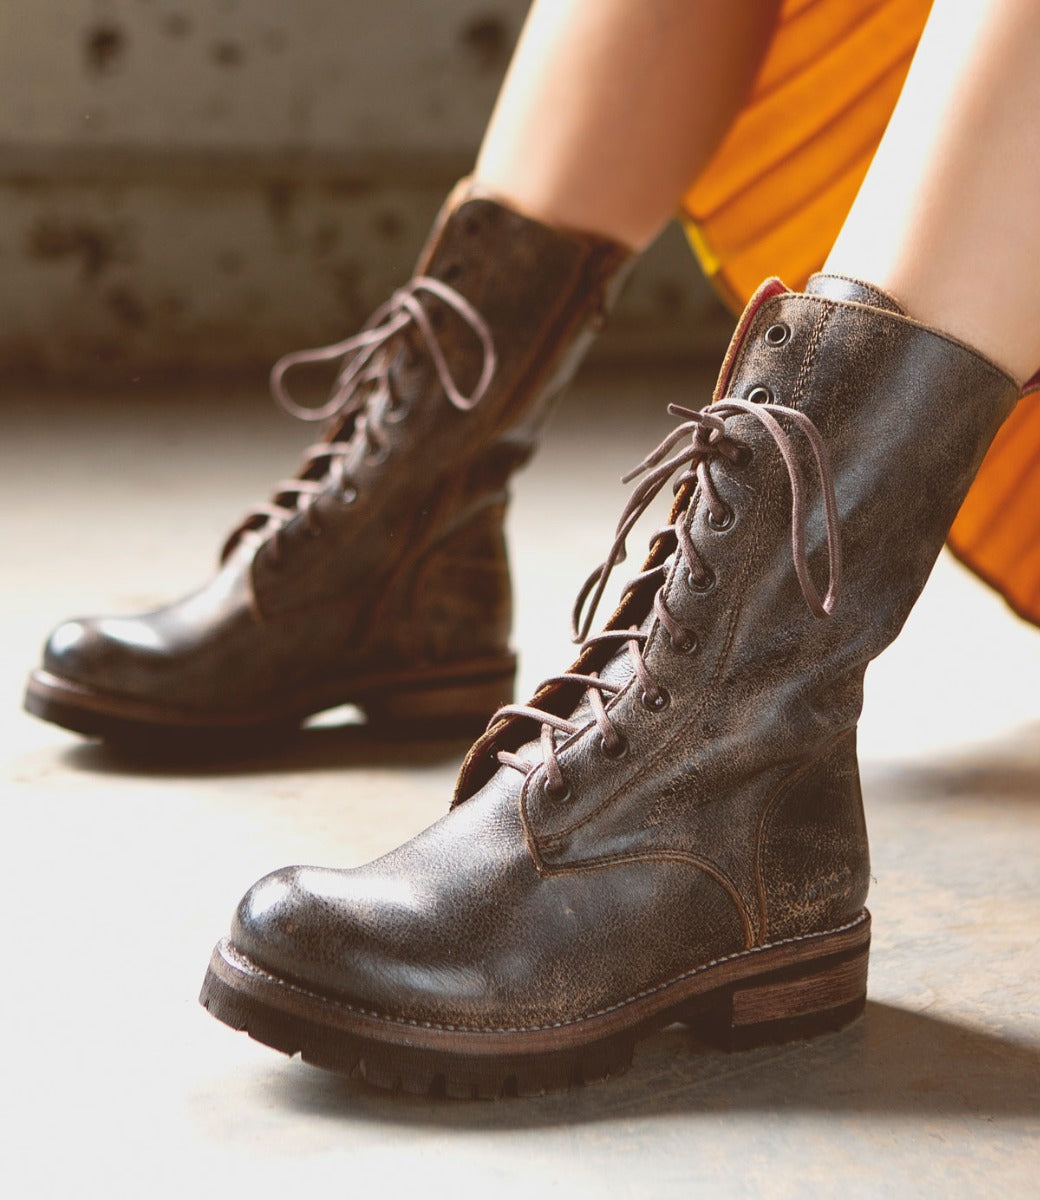 A pair of women's Posh brown combat boots by Bed Stu on a concrete floor.